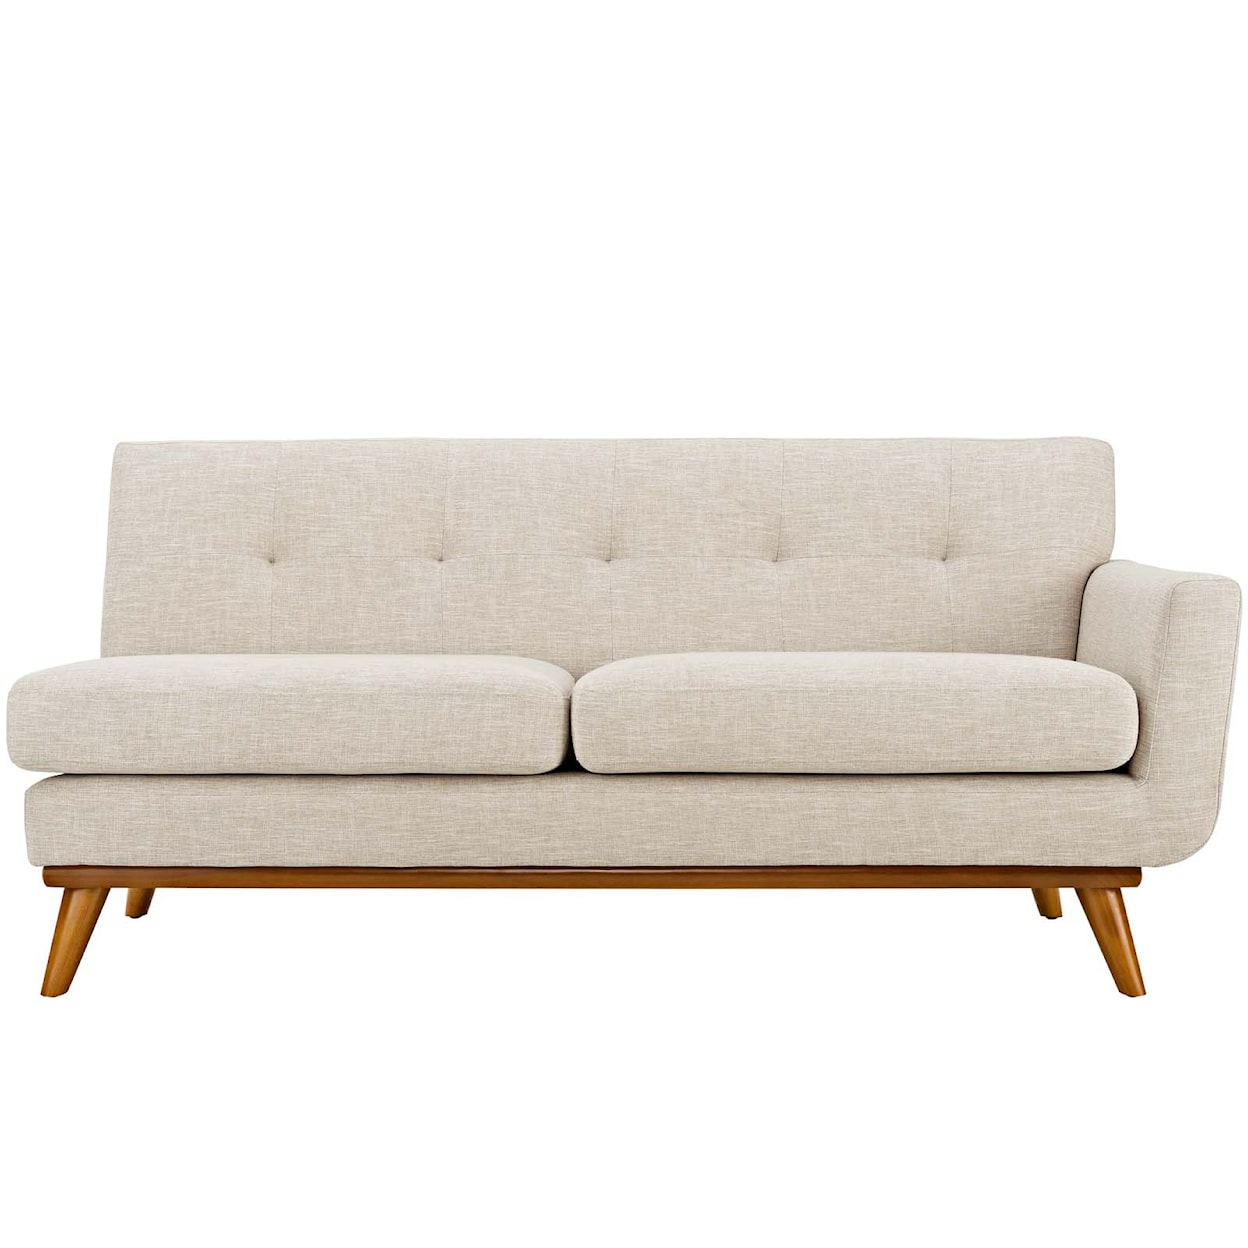 Modway Engage Right-Arm Loveseat